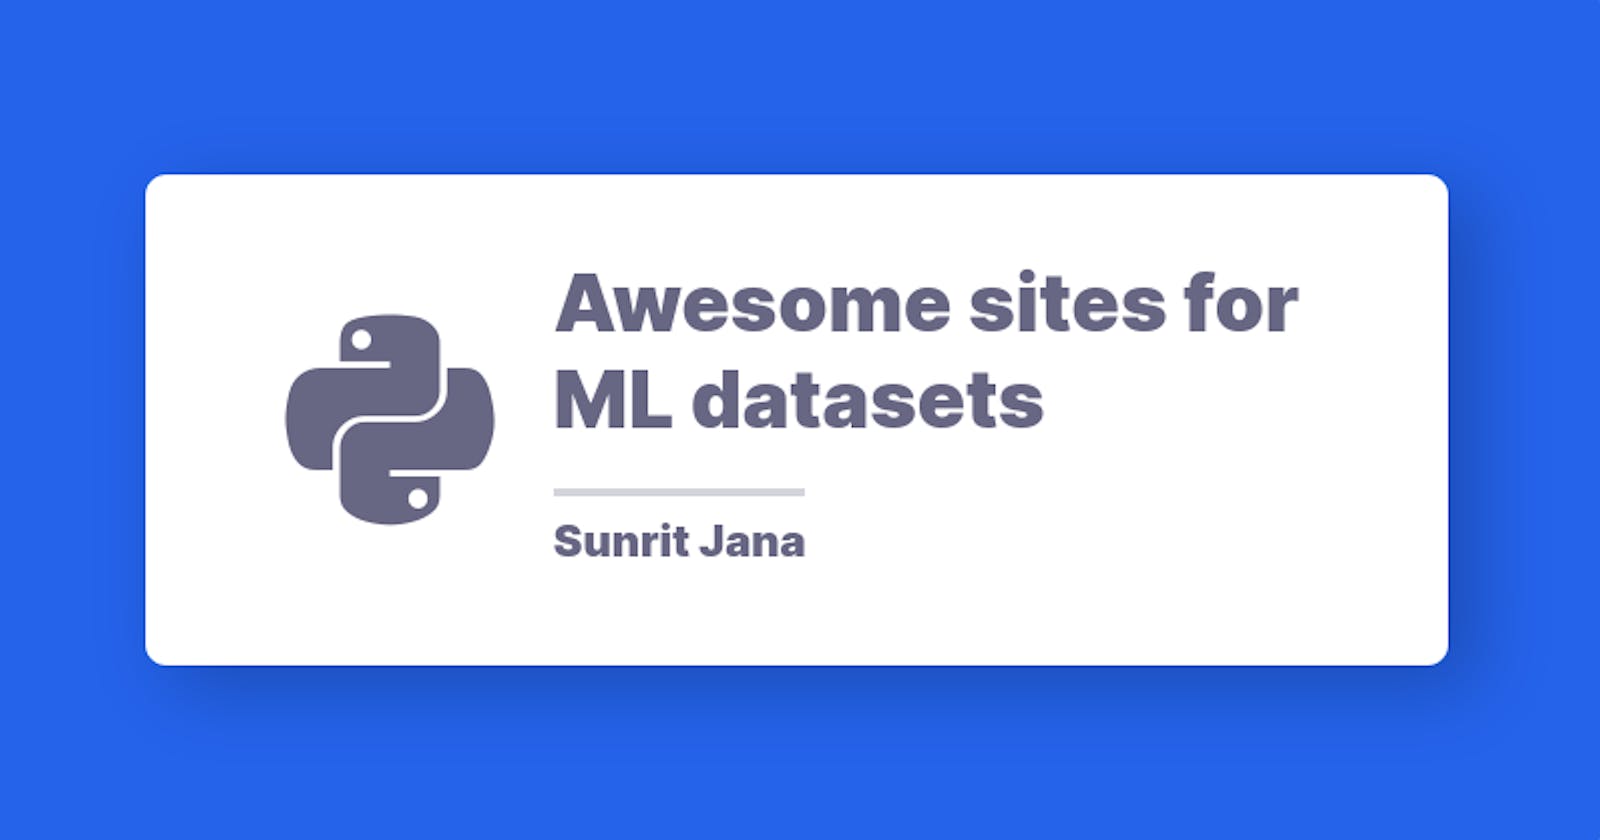 Awesome sites for ML datasets